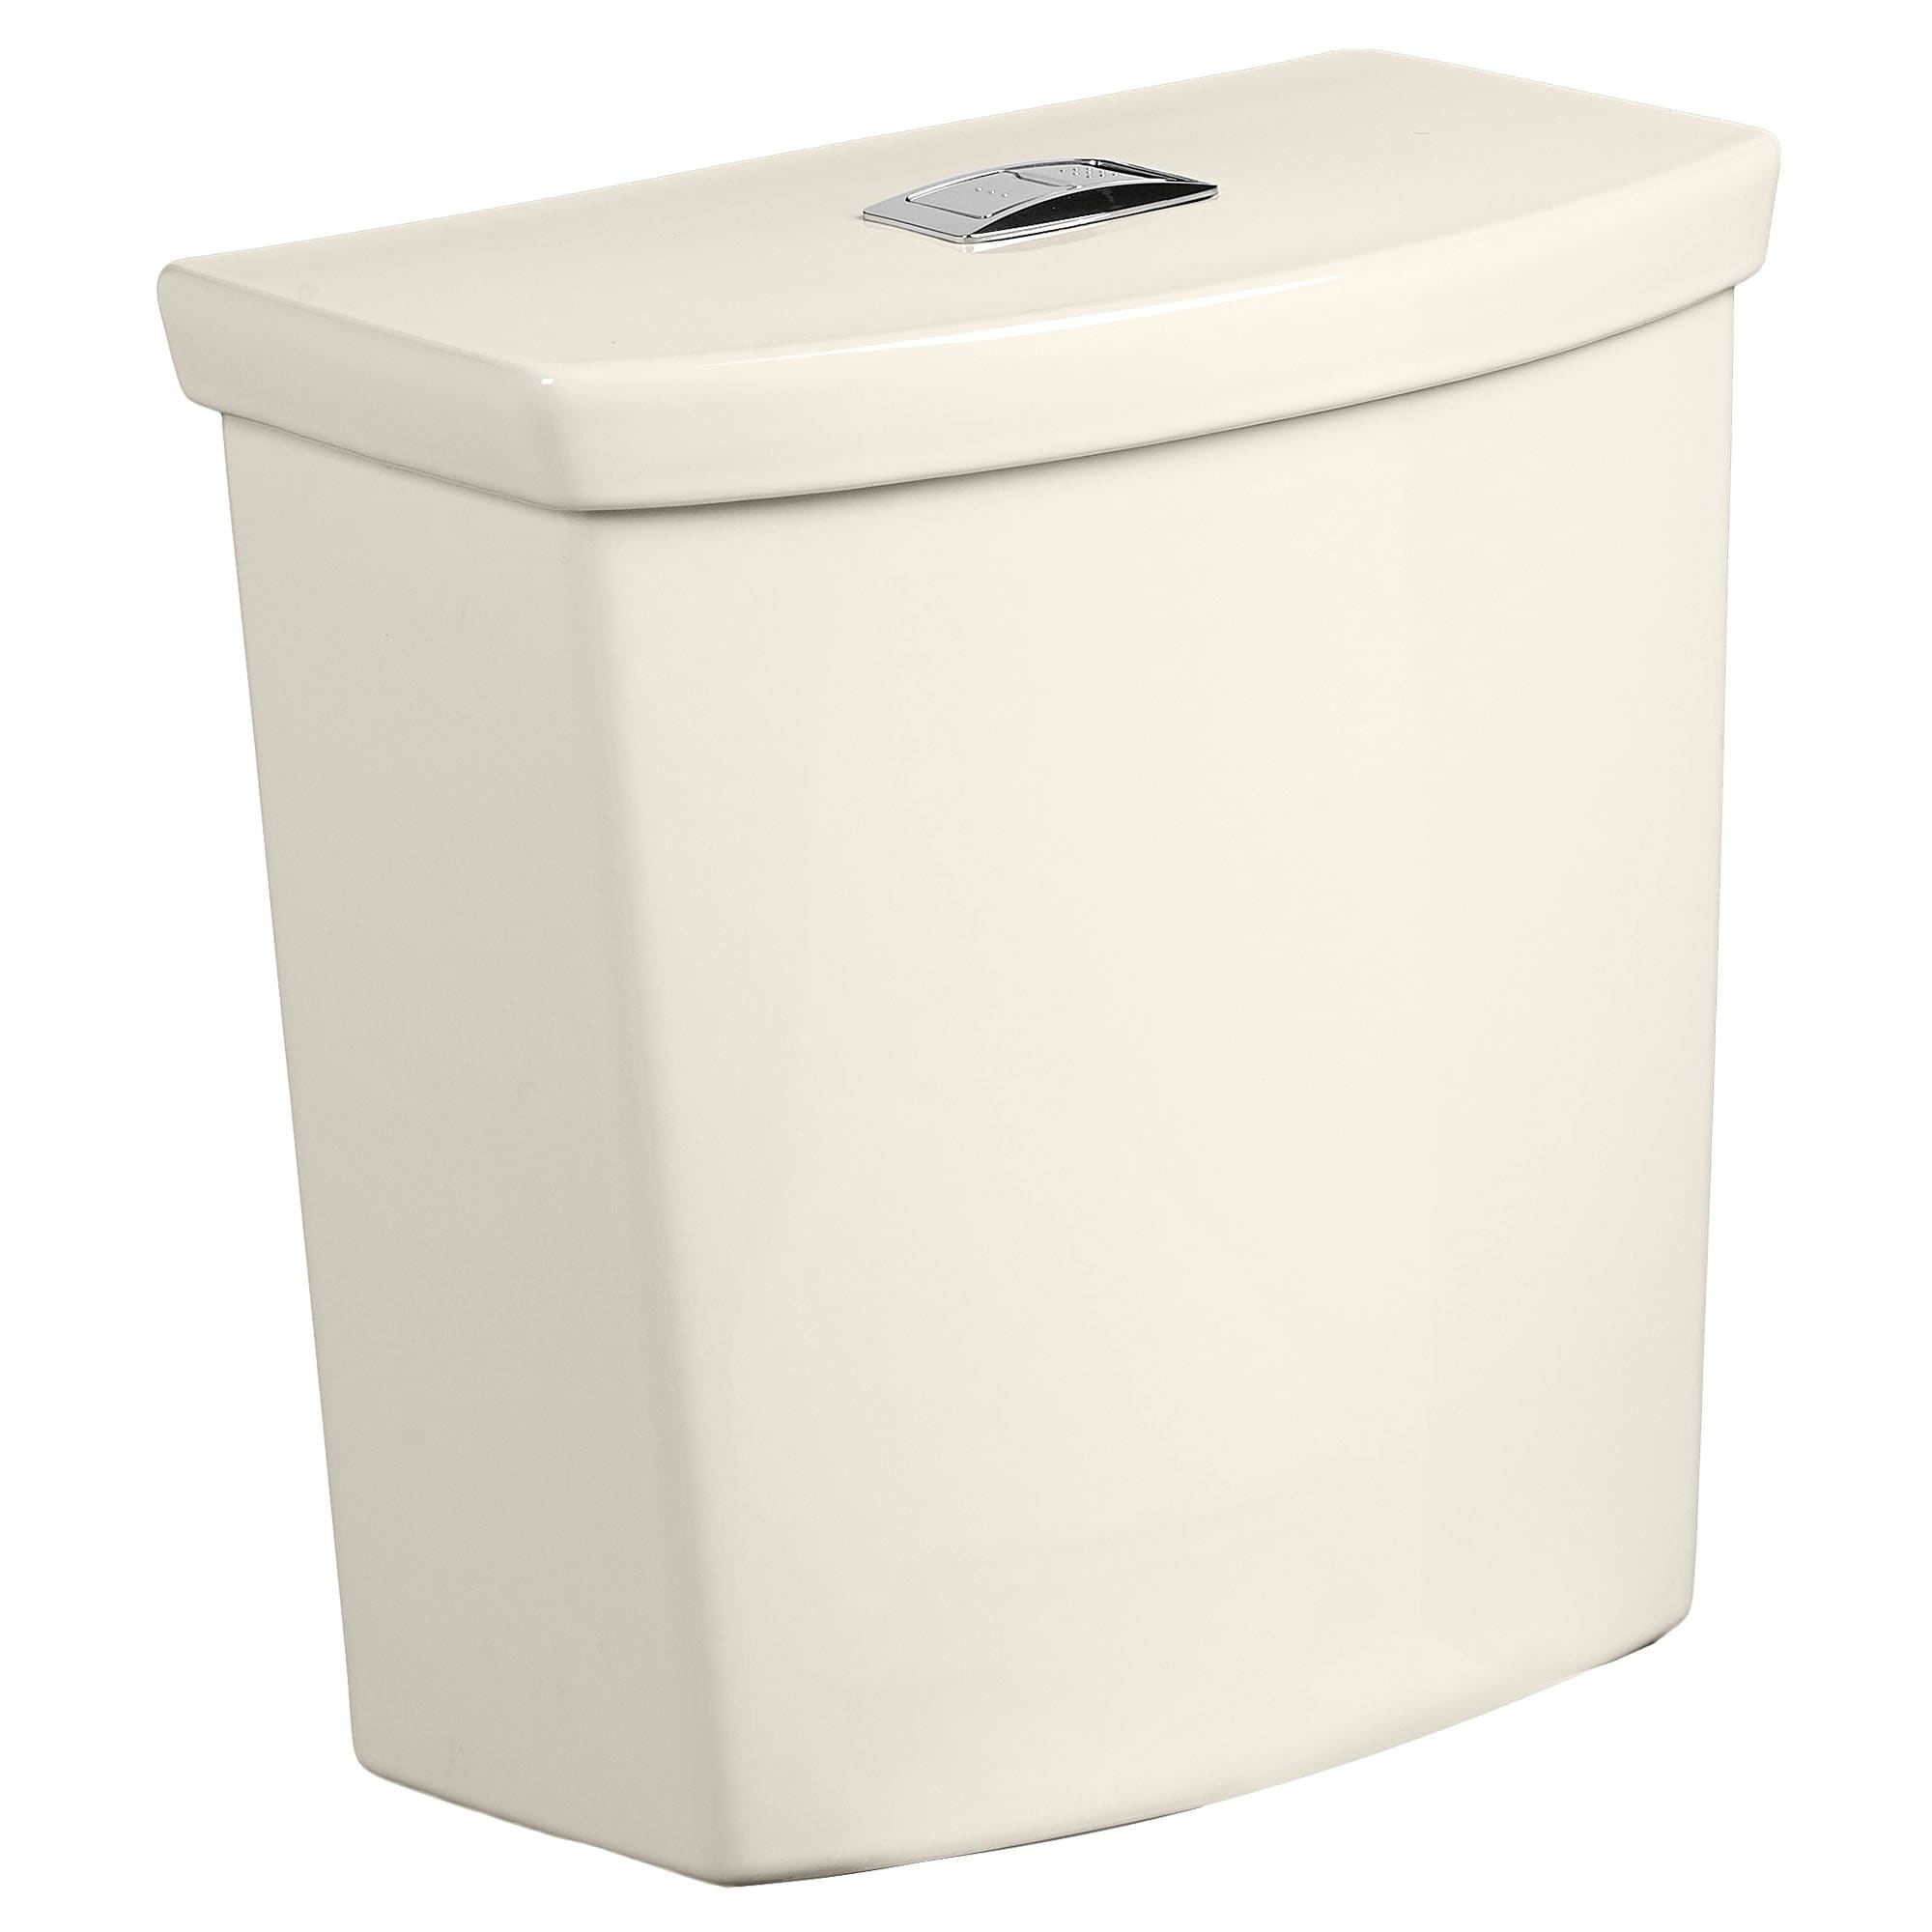 H2Option Linen 1.28-GPF Dual-Flush High Efficiency Toilet Tank in Off-White | - American Standard 4133A218.222